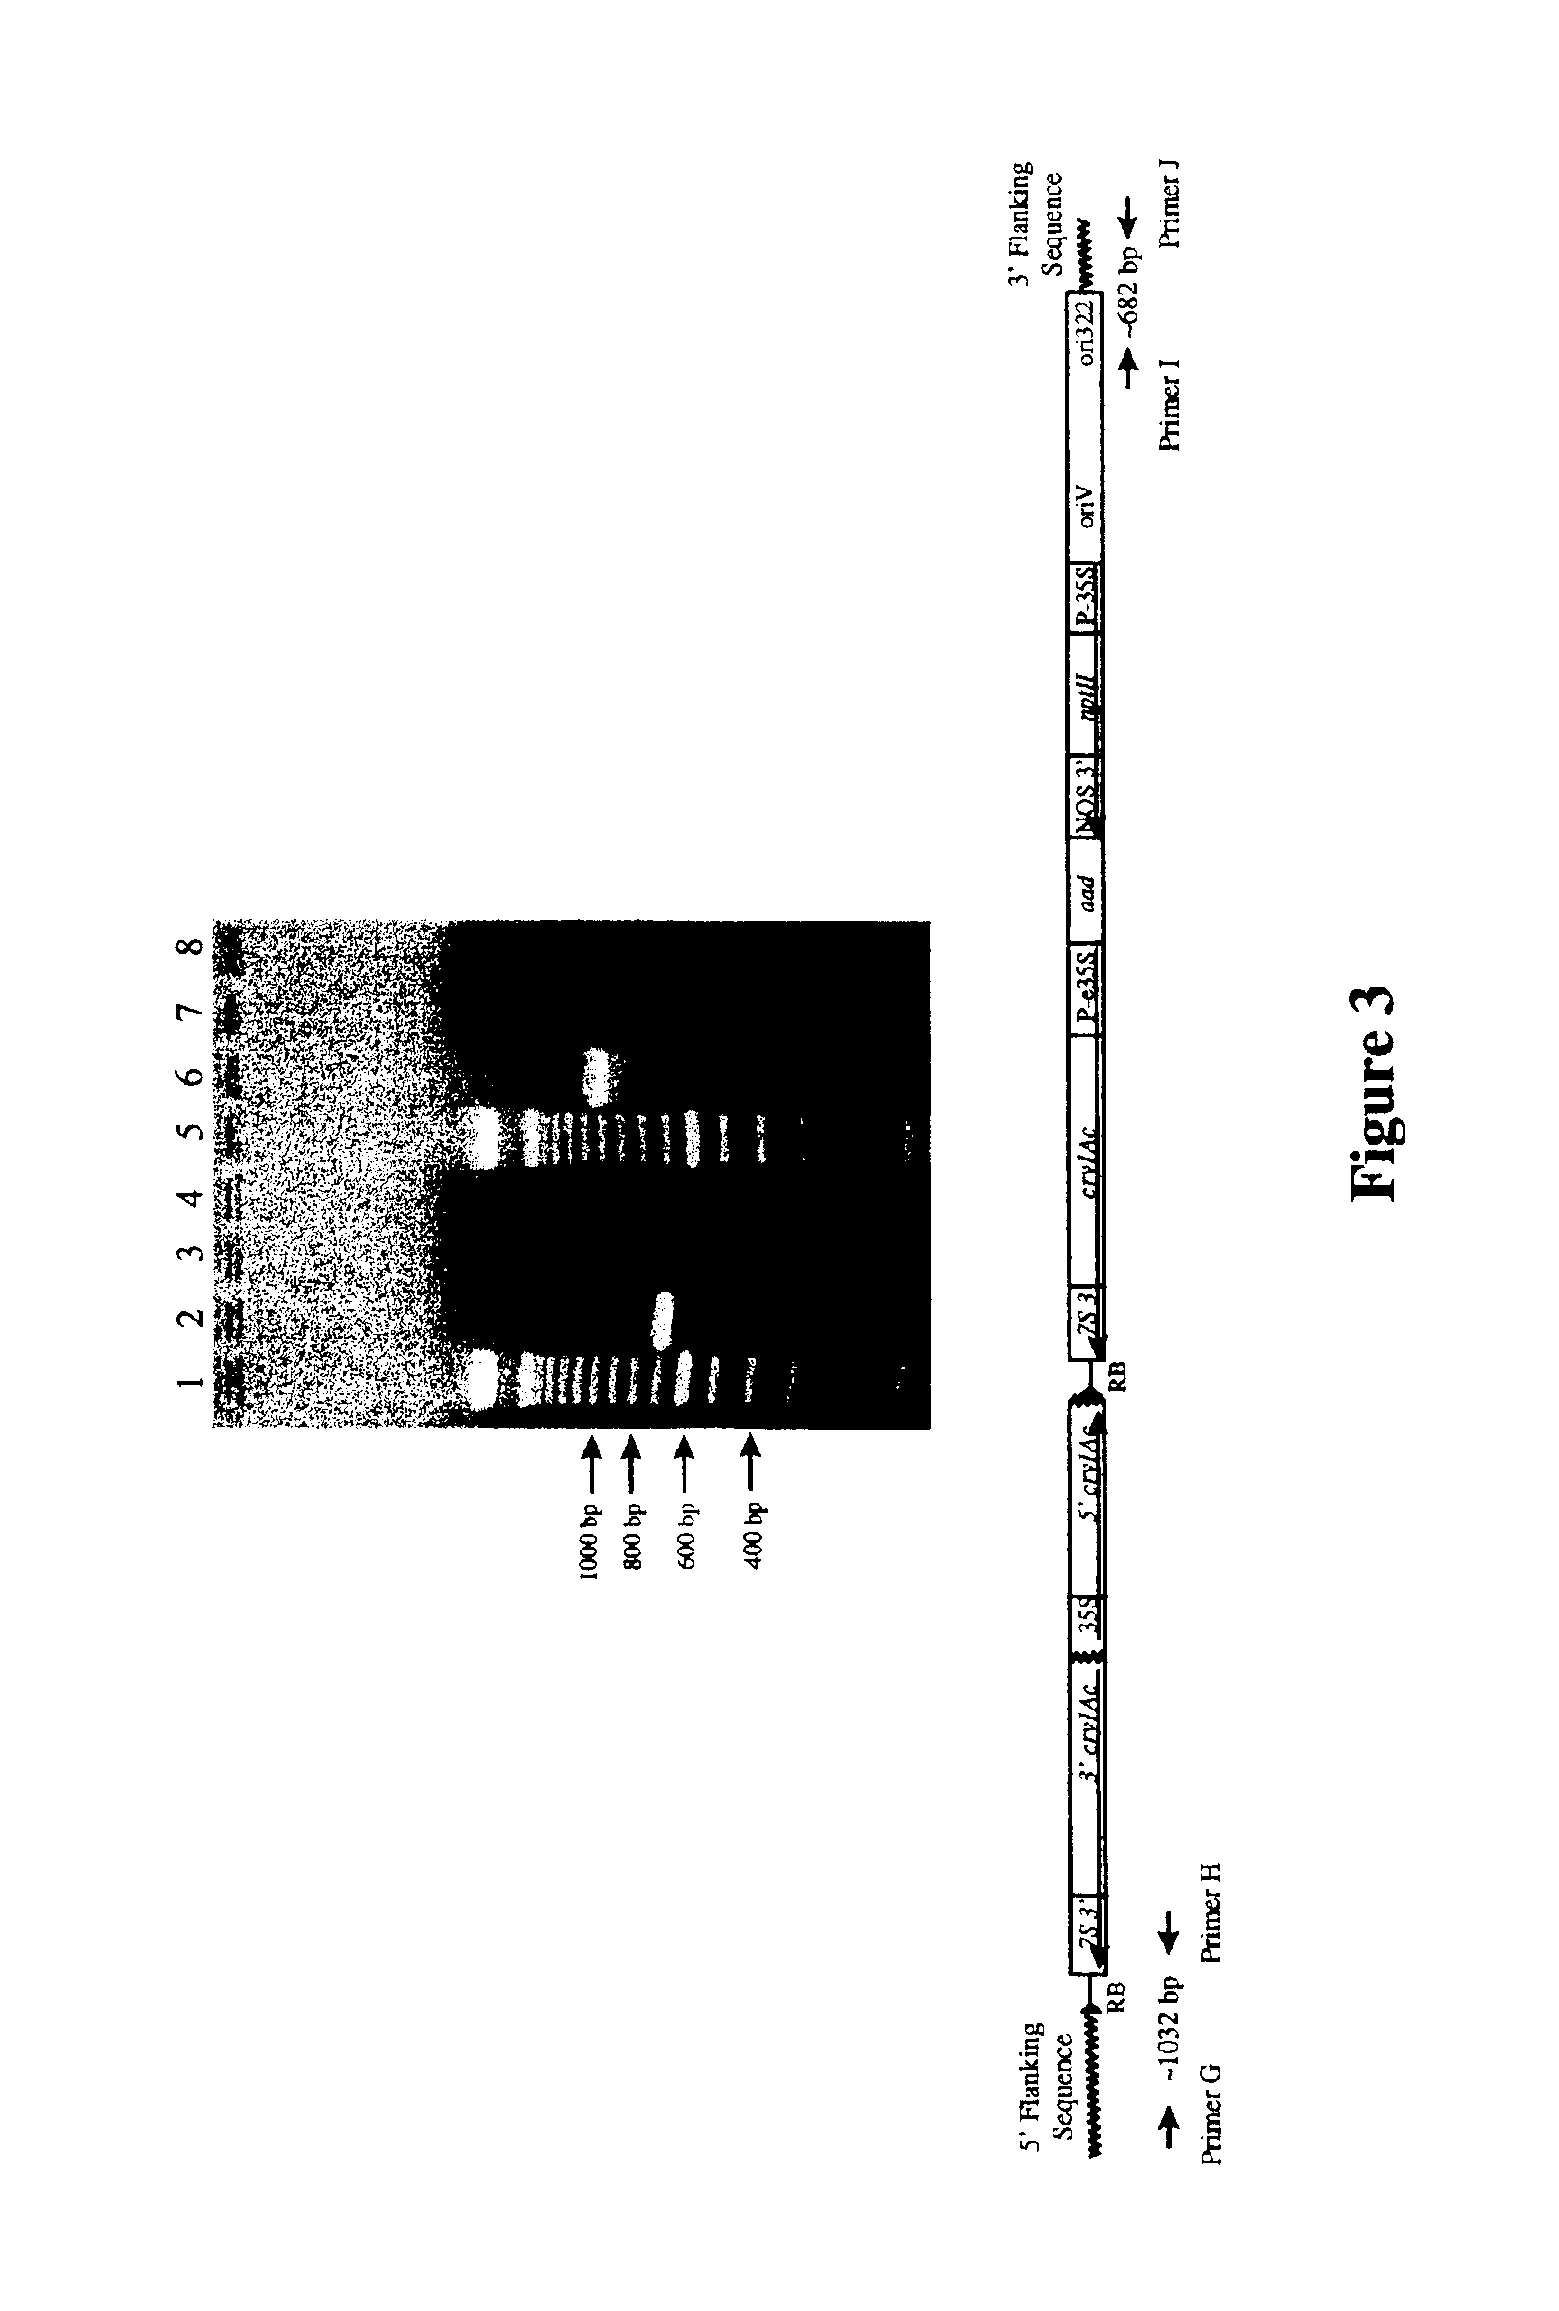 Cotton event PV-GHBK04 (757) and compositions and methods for detection thereof